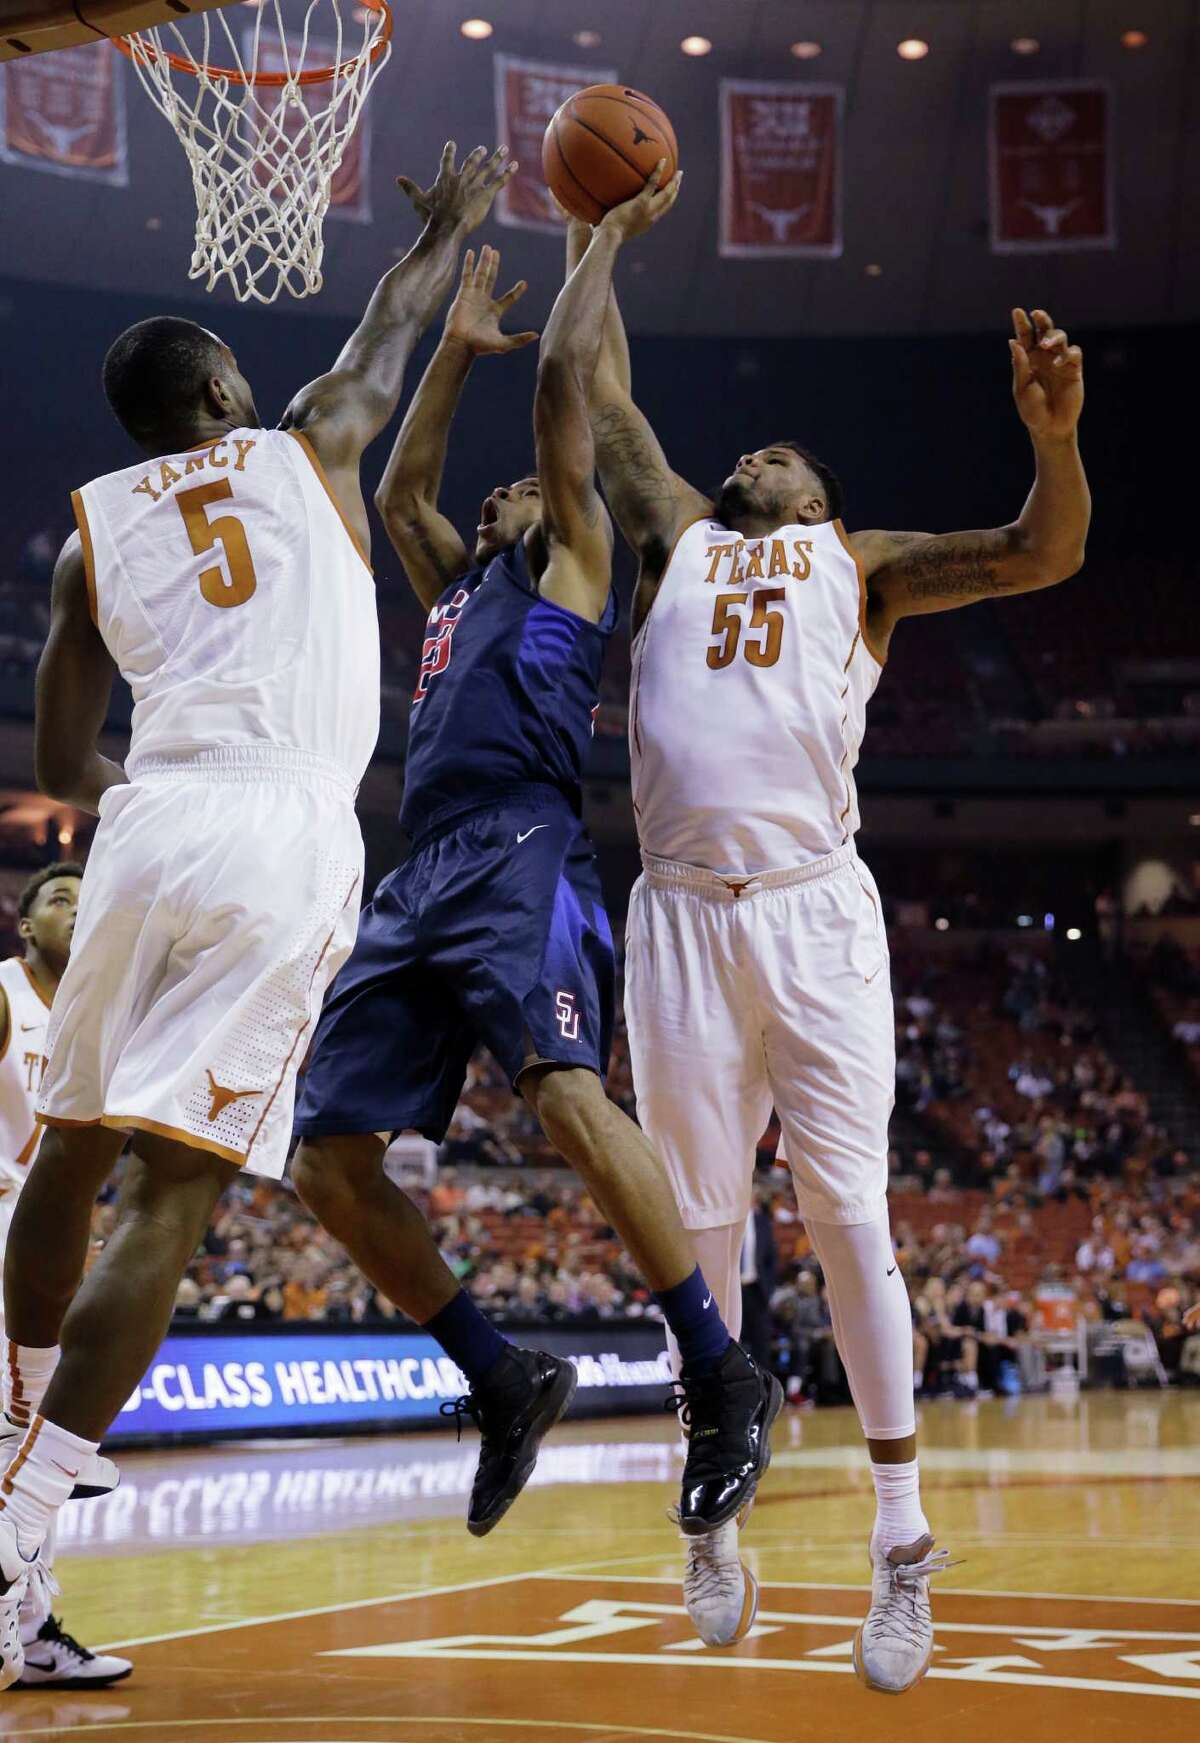 2720 x 3950~~$~~Samford forward Iman Johnson (23) is stopped by Texas defenders Kendal Yancy (5) and Cameron Ridley (55) during the first half of an NCAA college basketball game Friday, Dec. 4, 2015, in Austin, Texas.